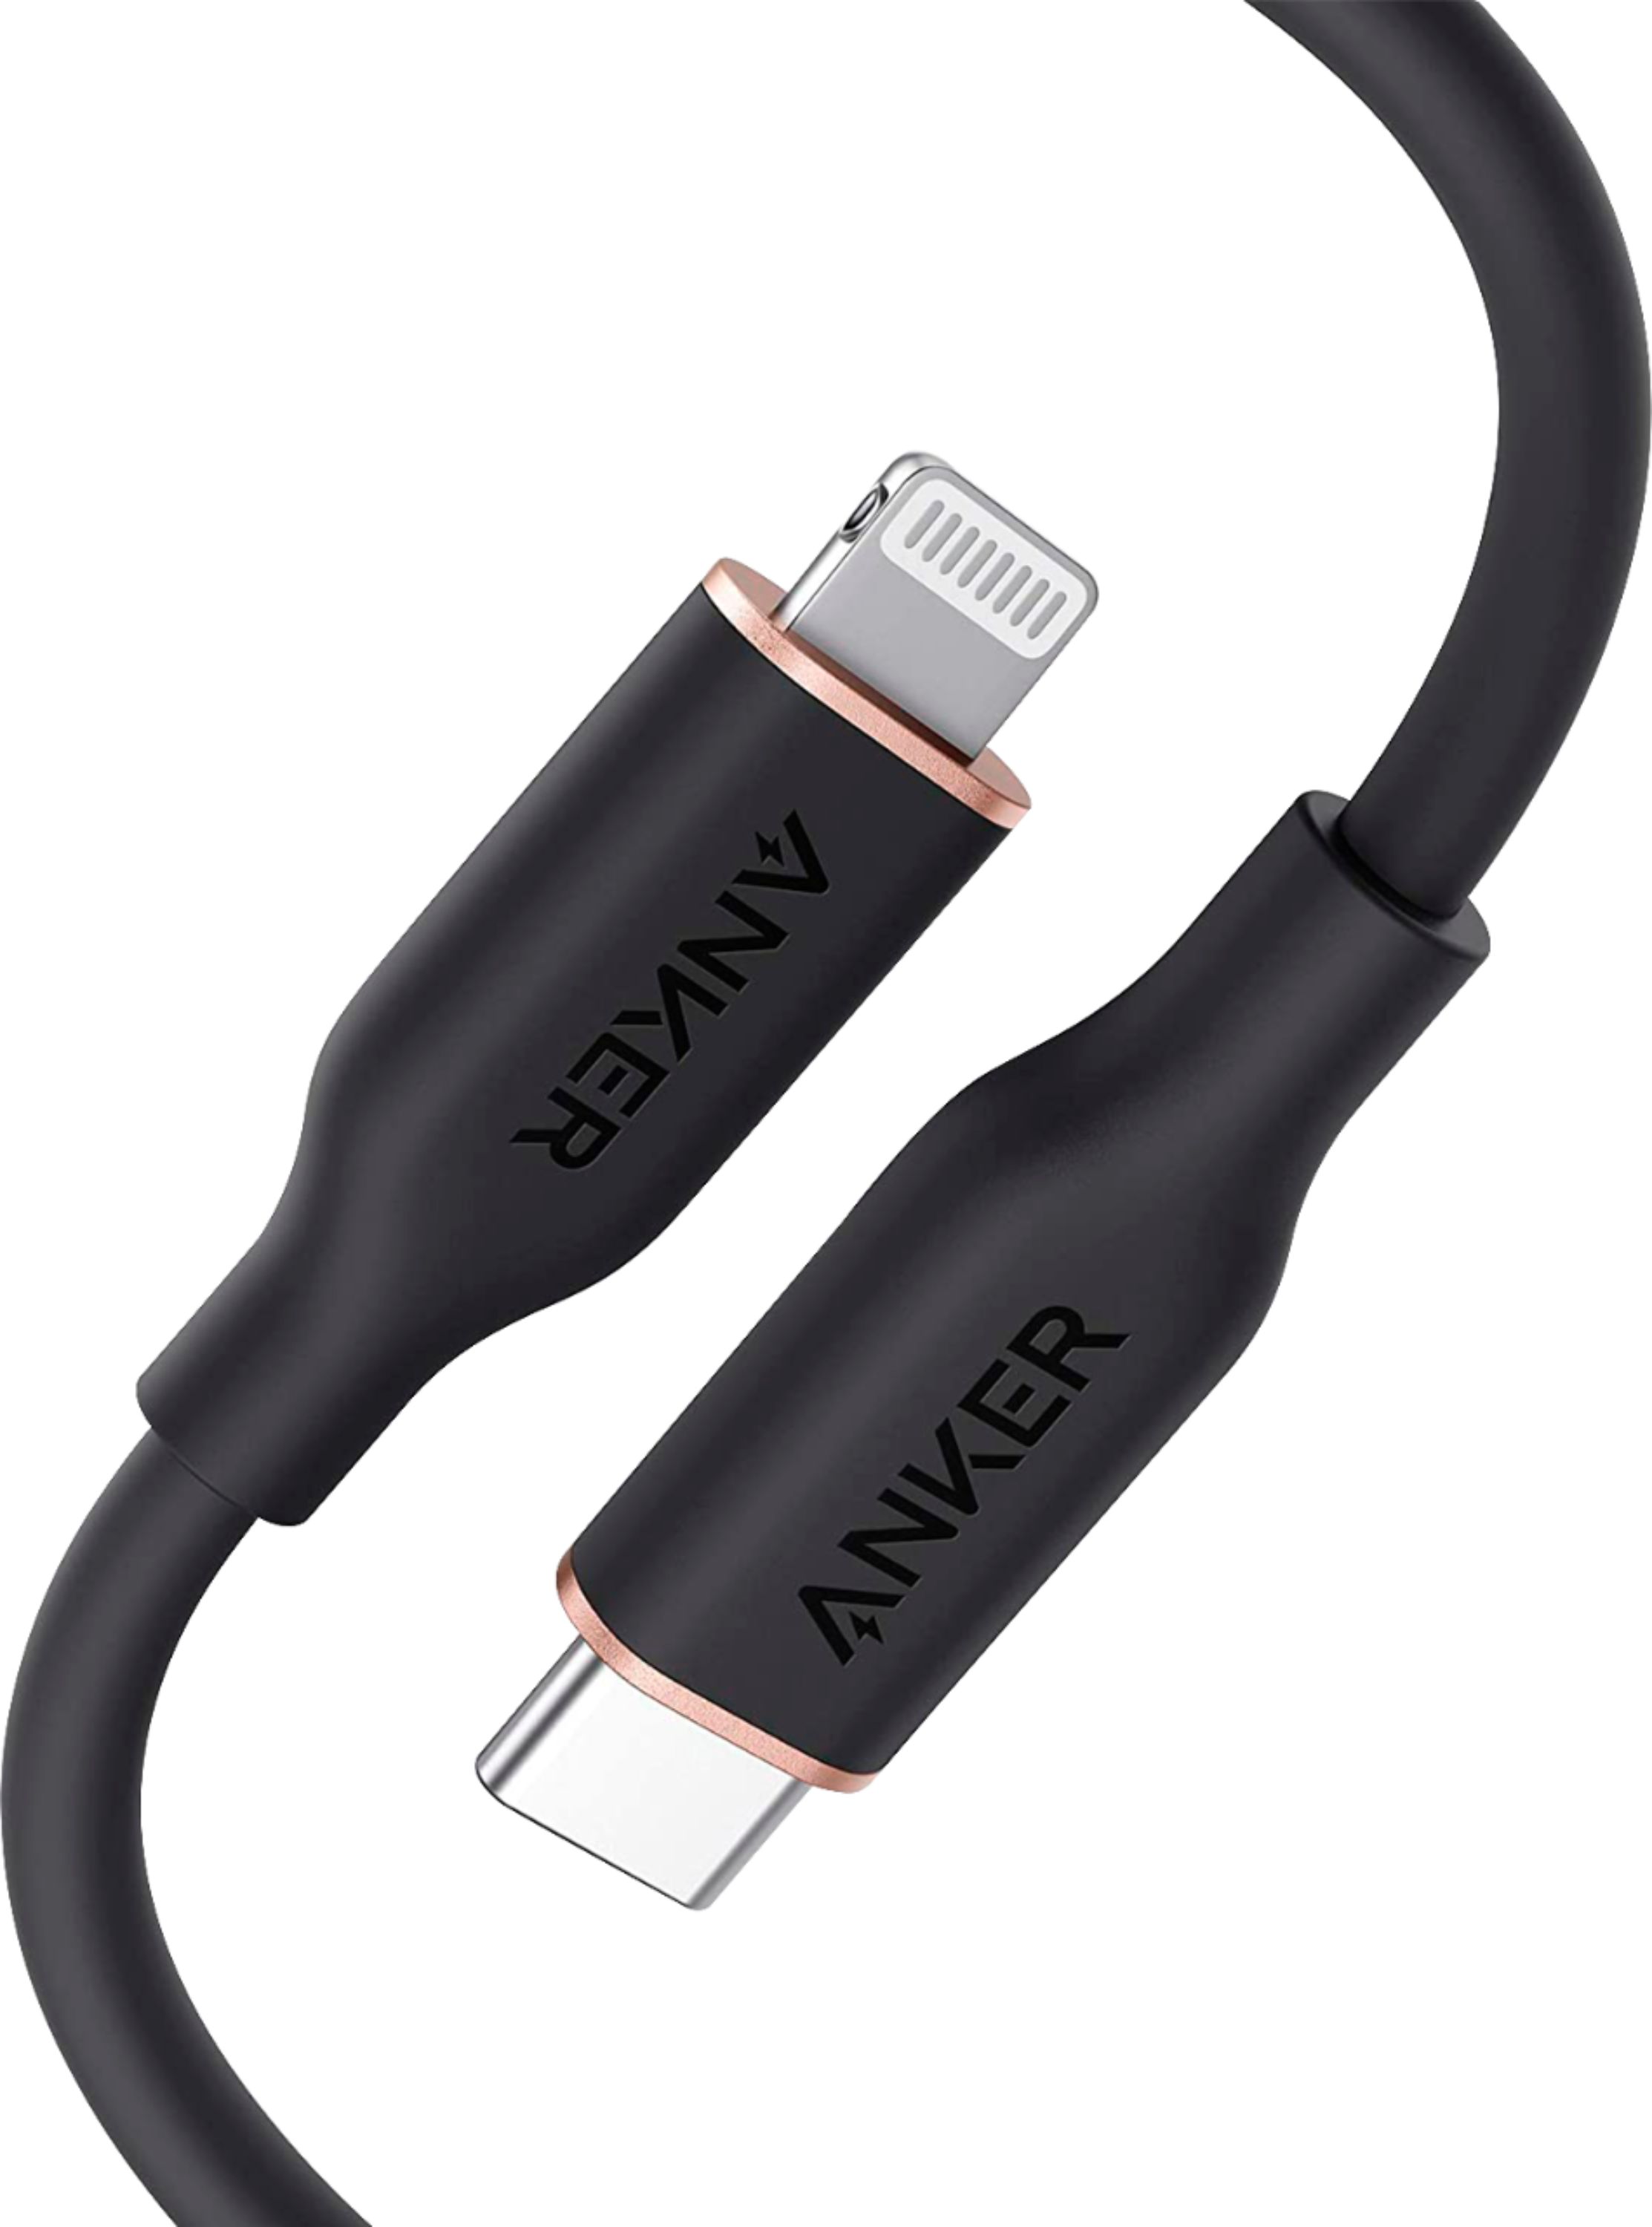 Anker - PowerLine III Flow USB-C to Lightning Cable 6-ft - Black